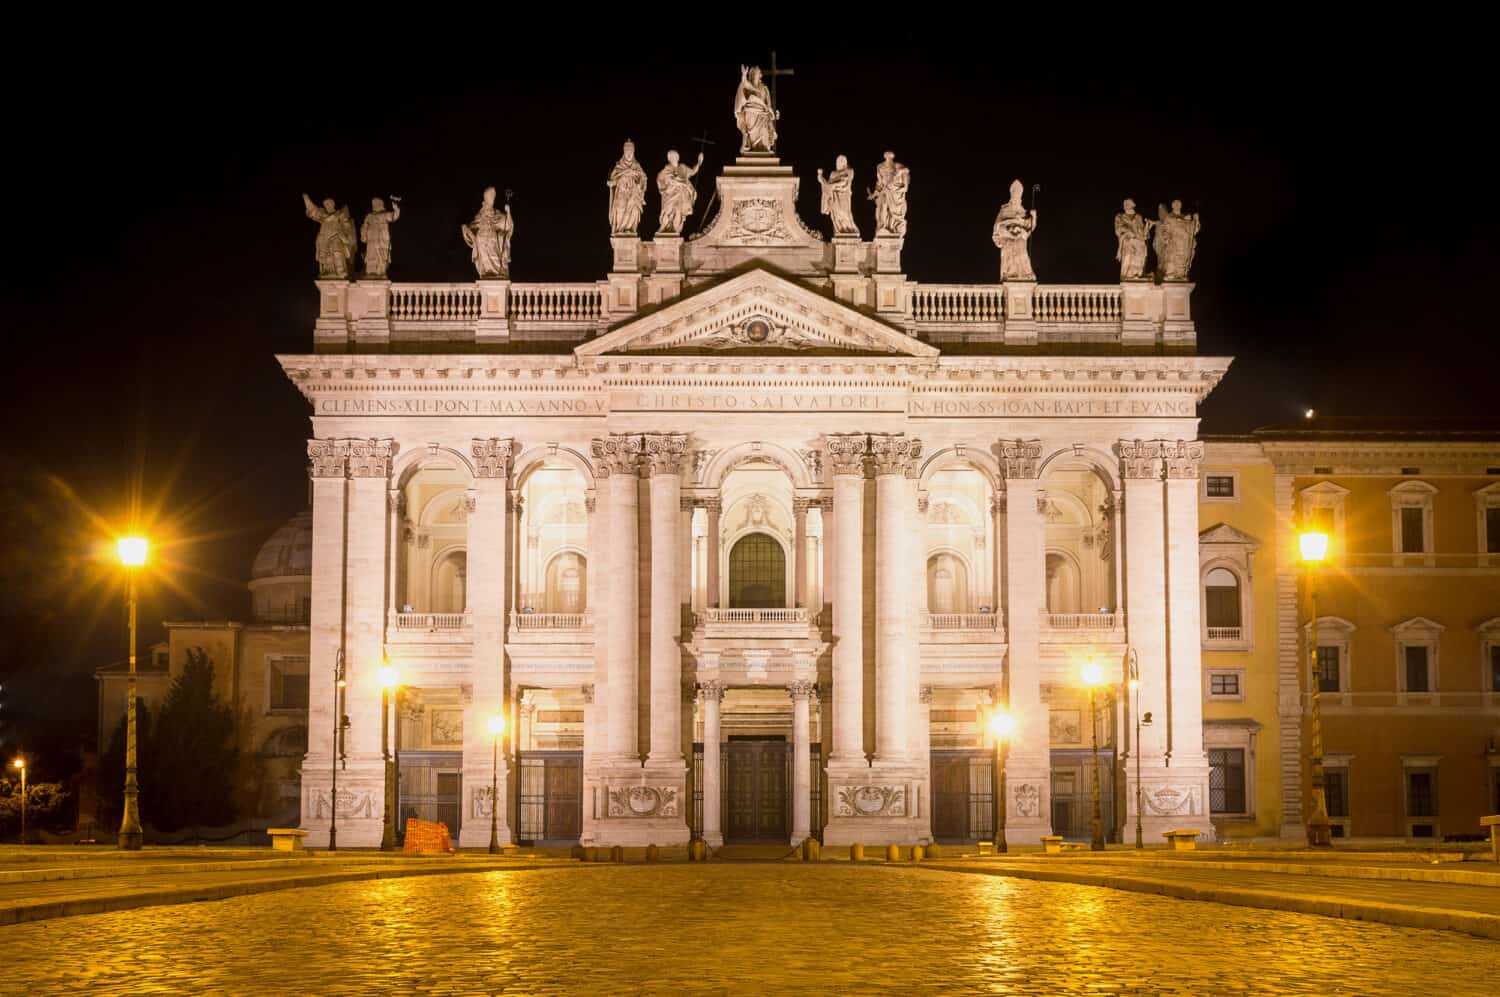 The papal archbasilica (or basilica) of St John in the Lateran, in Rome,, Italy, lit in the dark night. This is the main church or basilica of Cathoiic world, the bishop's seat of the Pope.